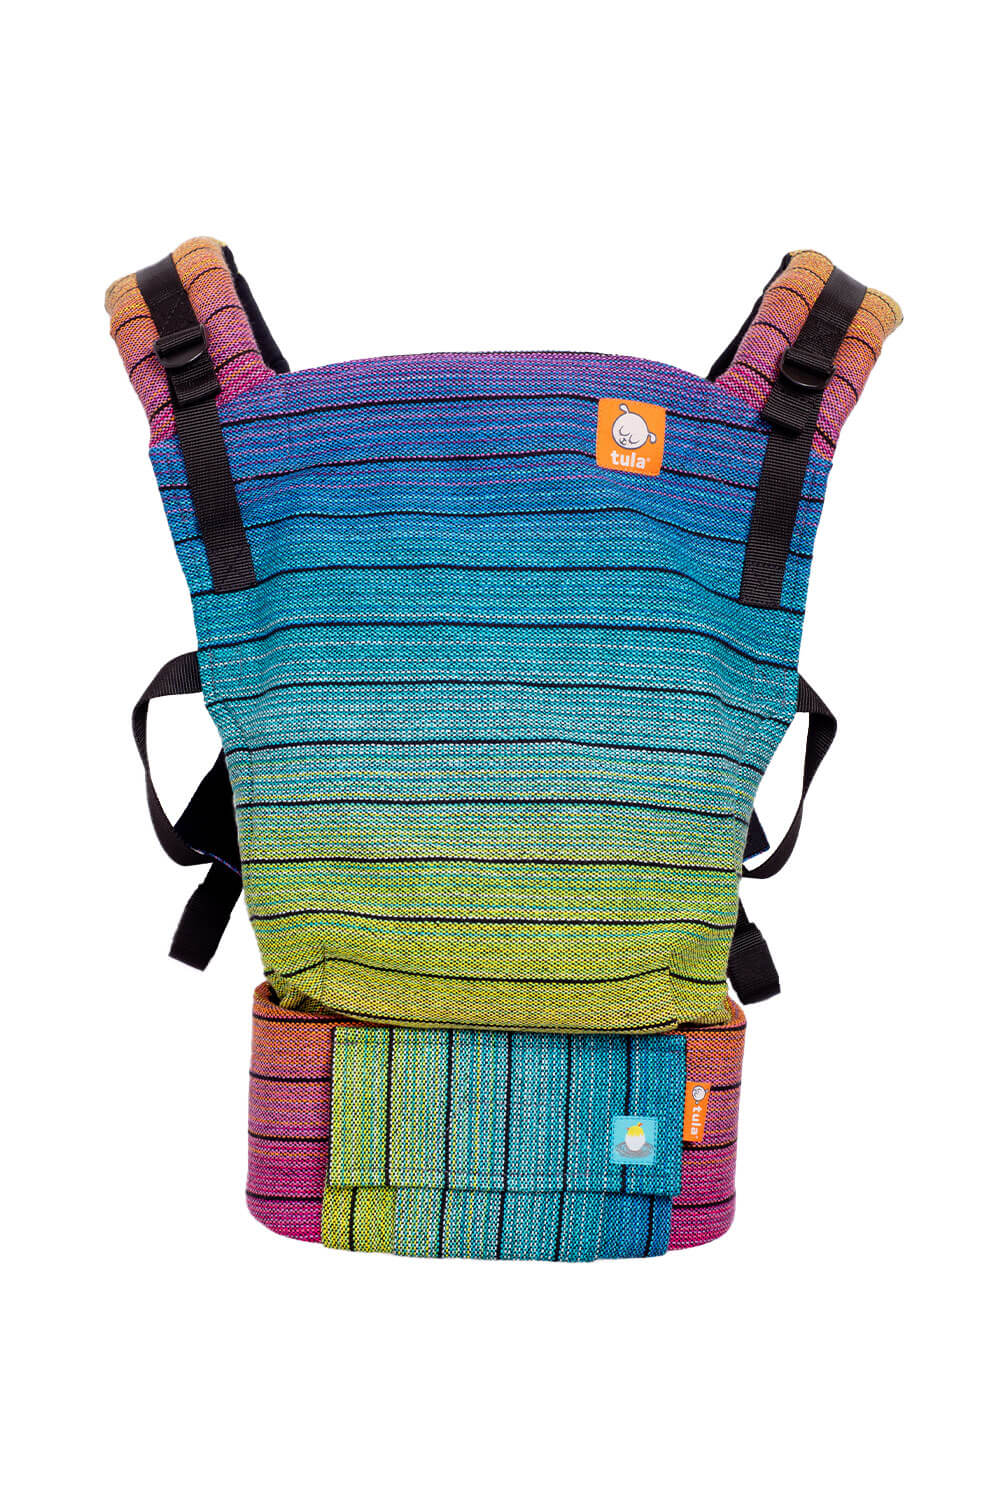 Moody - Signature Handwoven Free-to-Grow Baby Carrier